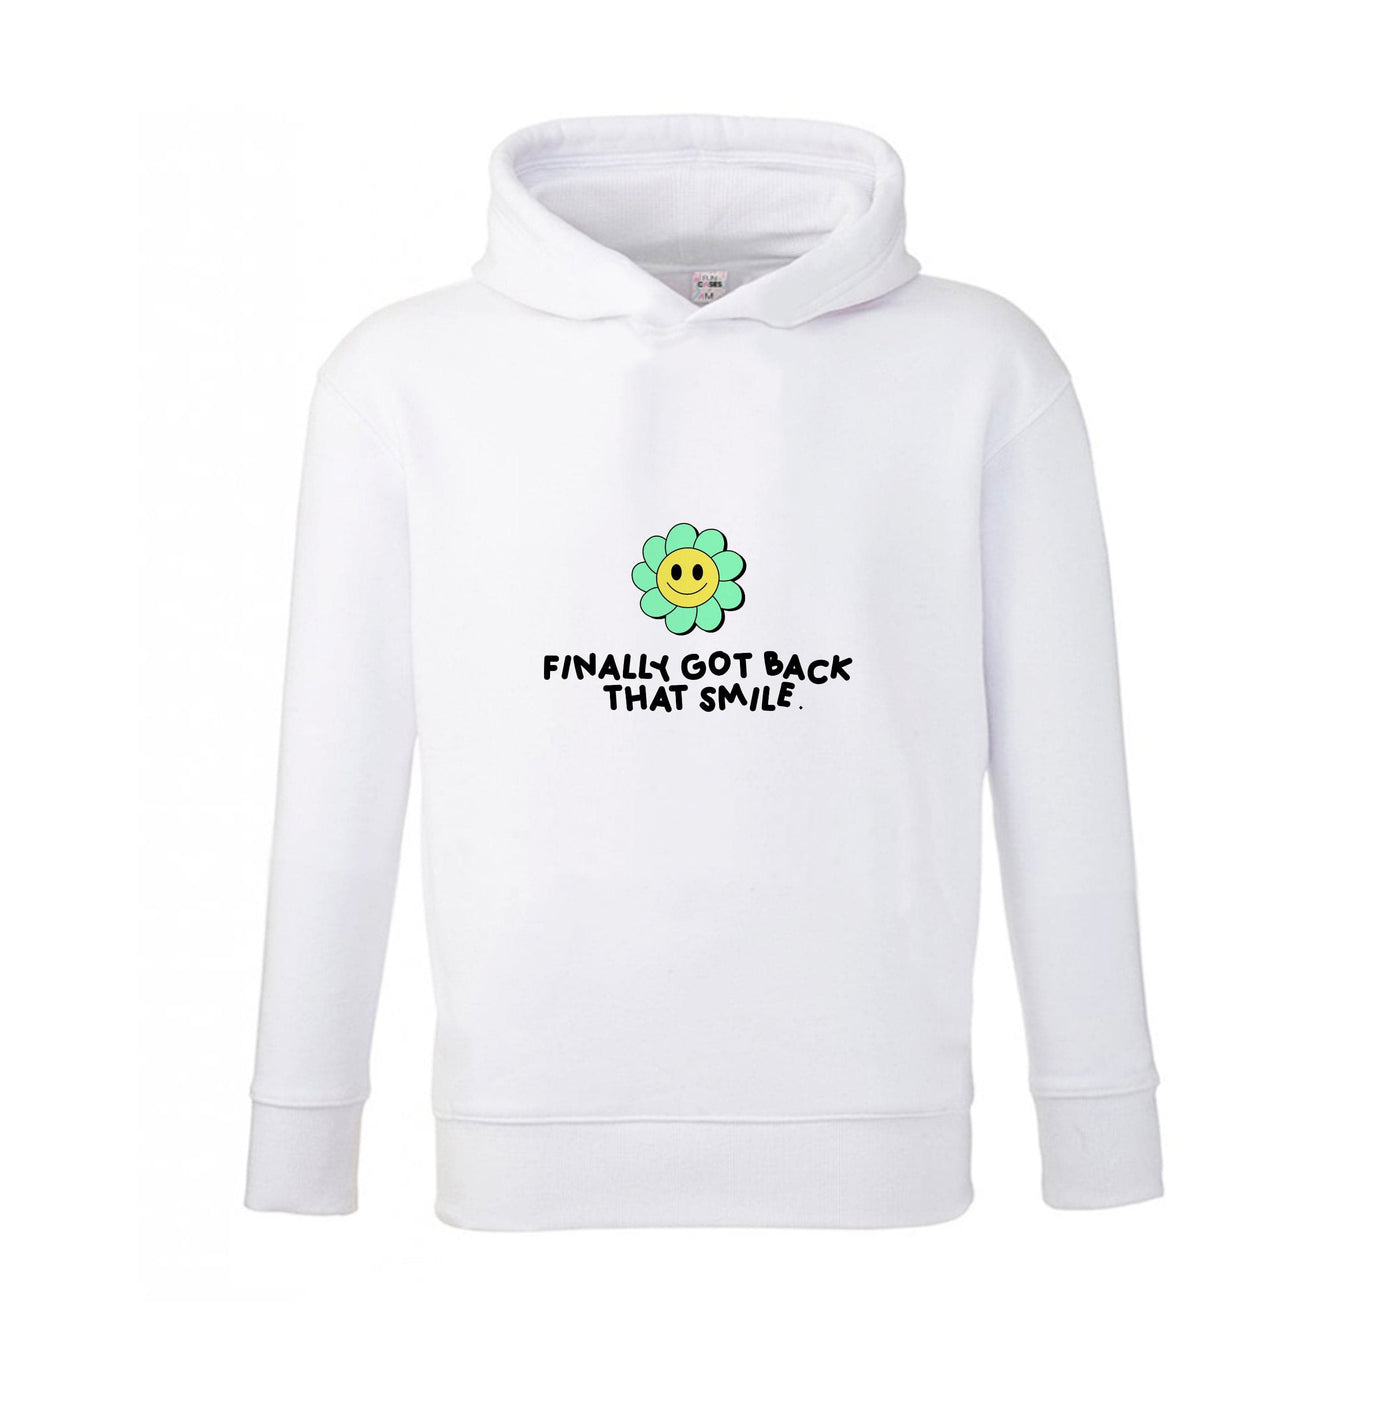 Finally Got Back That Smile - Katy Perry Kids Hoodie